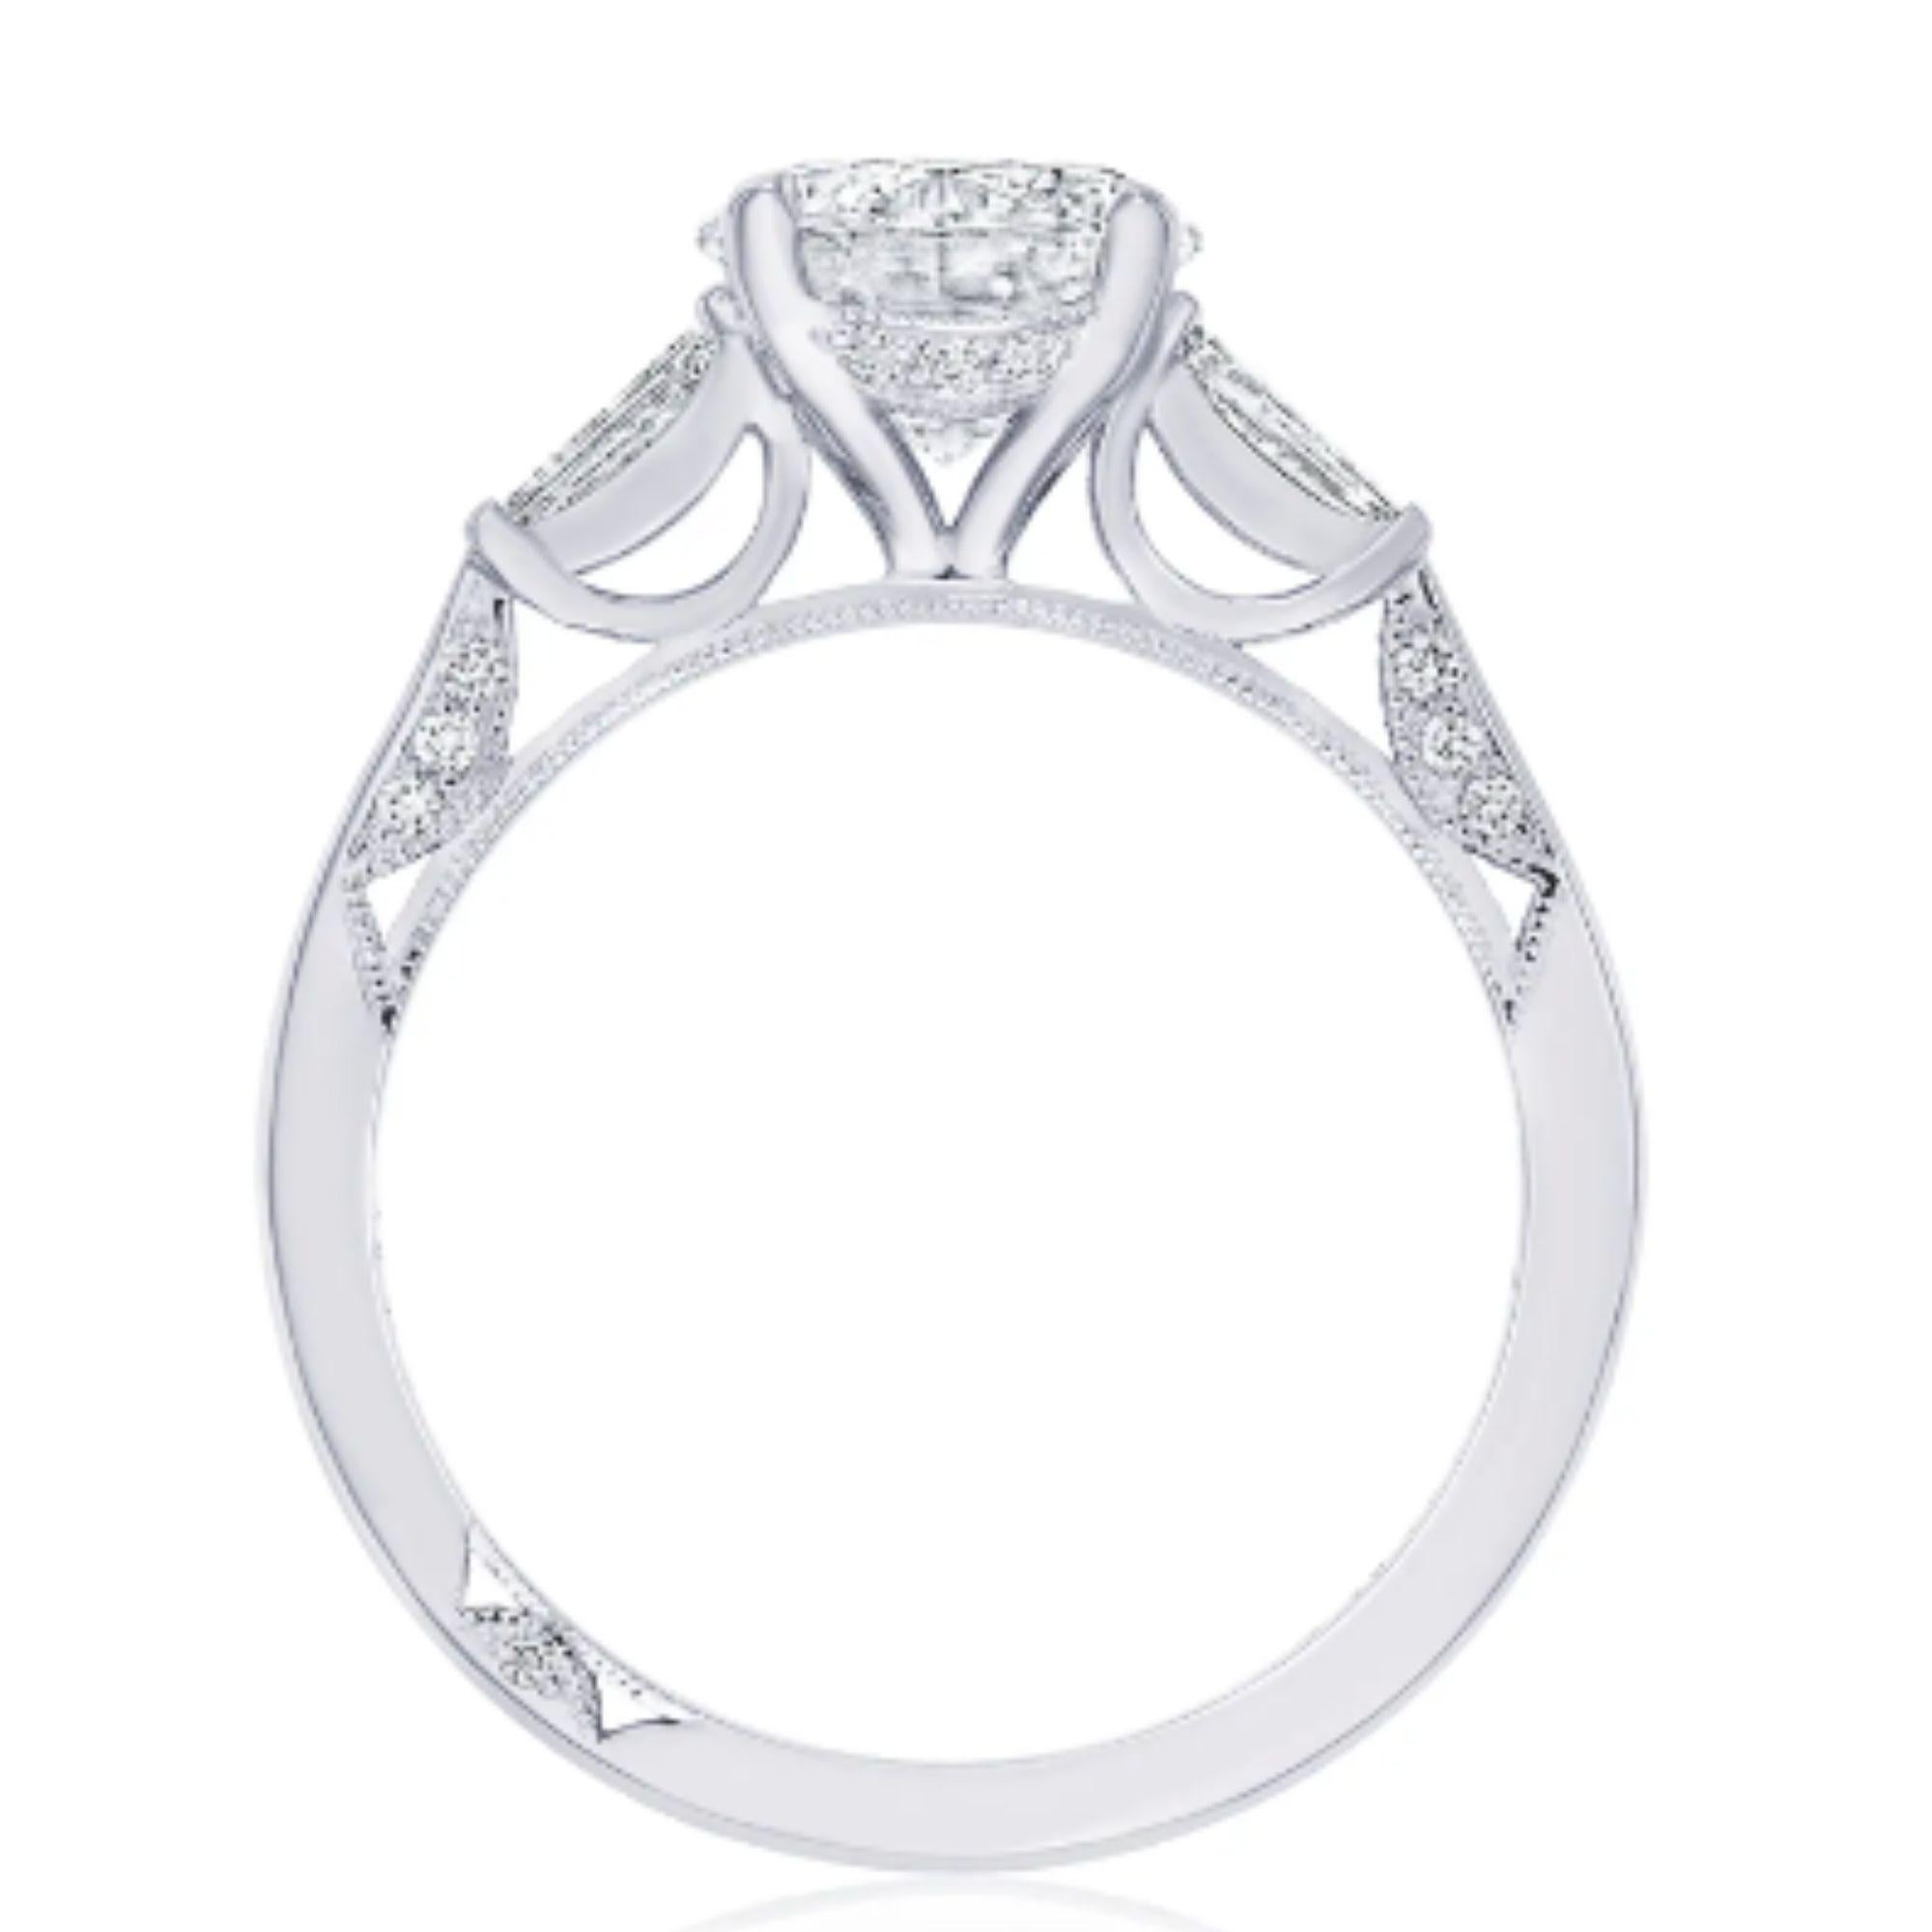 Let your diamond engagement ring stand out by contrasting your side stones with your center diamond! Baguette side stones graduate to the round center mounting, bringing a magical contrast to bring about beauty from every angle. The ring is set with